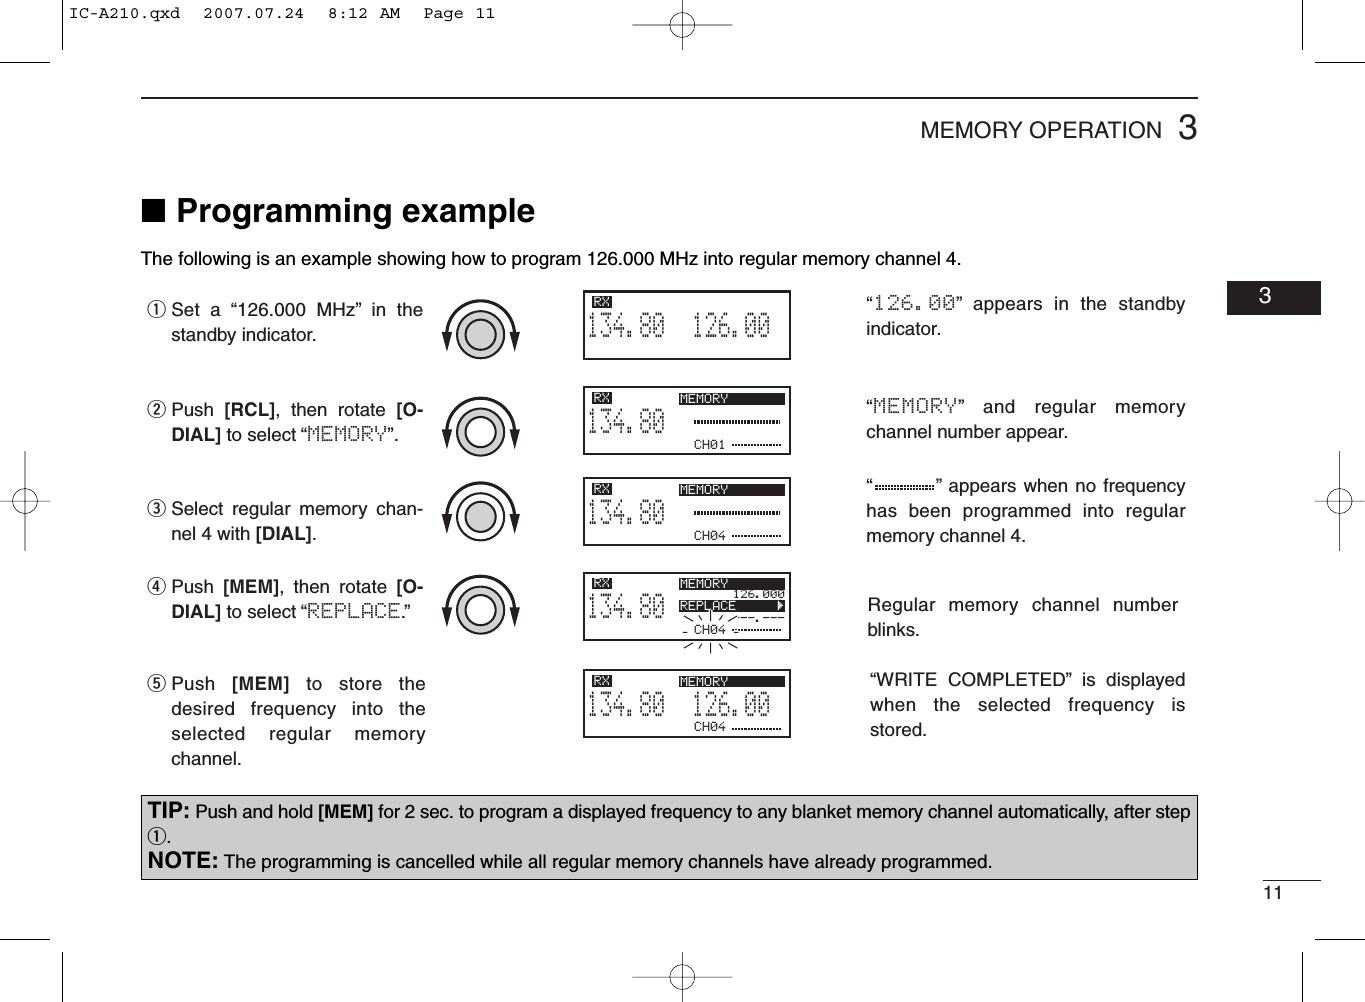 113MEMORY OPERATION03■Programming exampleThe following is an example showing how to program 126.000 MHz into regular memory channel 4.“         ” appears when no frequency has been programmed into regular memory channel 4.“MEMORY” and regular memory channel number appear.“126.00” appears in the standby indicator.126.005134.80RXCH01134.80RX MEMORYCH04134.80RX MEMORYCH04126.000---.---134.80RX MEMORYREPLACE       ÇCH04126.005134.80RX MEMORYSet a “126.000 MHz” in the standby indicator.qPush  [RCL], then rotate [O-DIAL] to select “MEMORY”.wPush  [MEM], then rotate [O-DIAL] to select “REPLACE.”rPush  [MEM] to store the desired frequency into the selected regular memory channel.tSelect regular memory chan-nel 4 with [DIAL].e“WRITE COMPLETED” is displayed when the selected frequency is stored.Regular memory channel number blinks.TIP: Push and hold [MEM] for 2 sec. to program a displayed frequency to any blanket memory channel automatically, after stepq.NOTE: The programming is cancelled while all regular memory channels have already programmed.IC-A210.qxd  2007.07.24  8:12 AM  Page 11